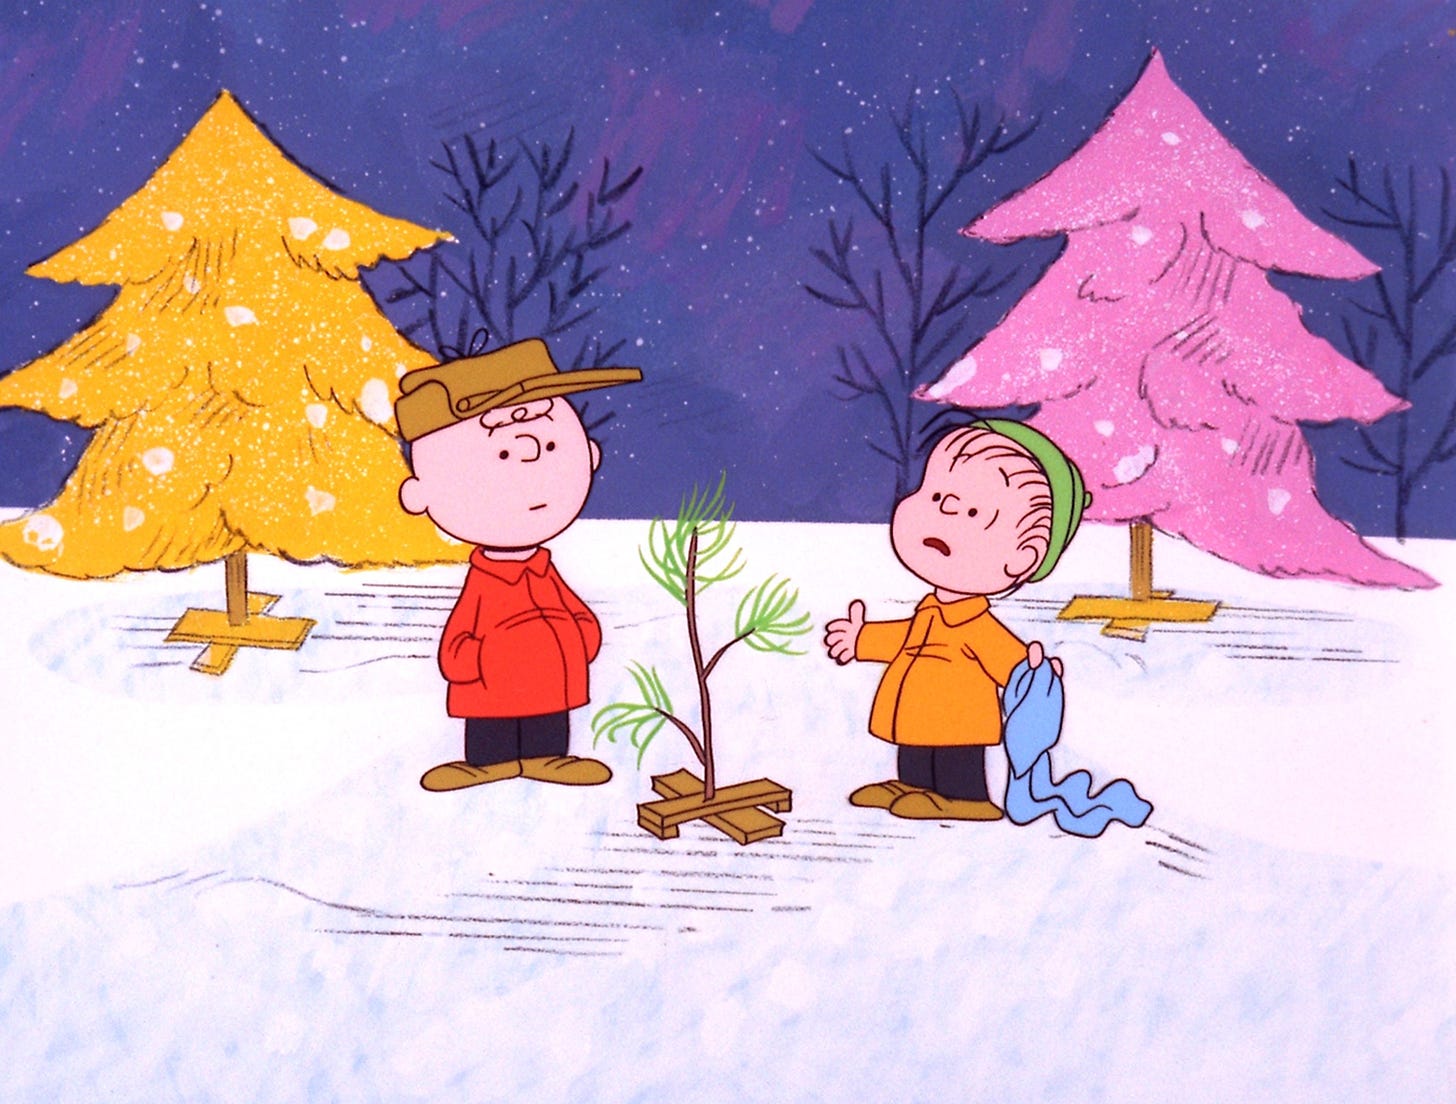 15 Best Quotes From 'A Charlie Brown Christmas' Movie for ...